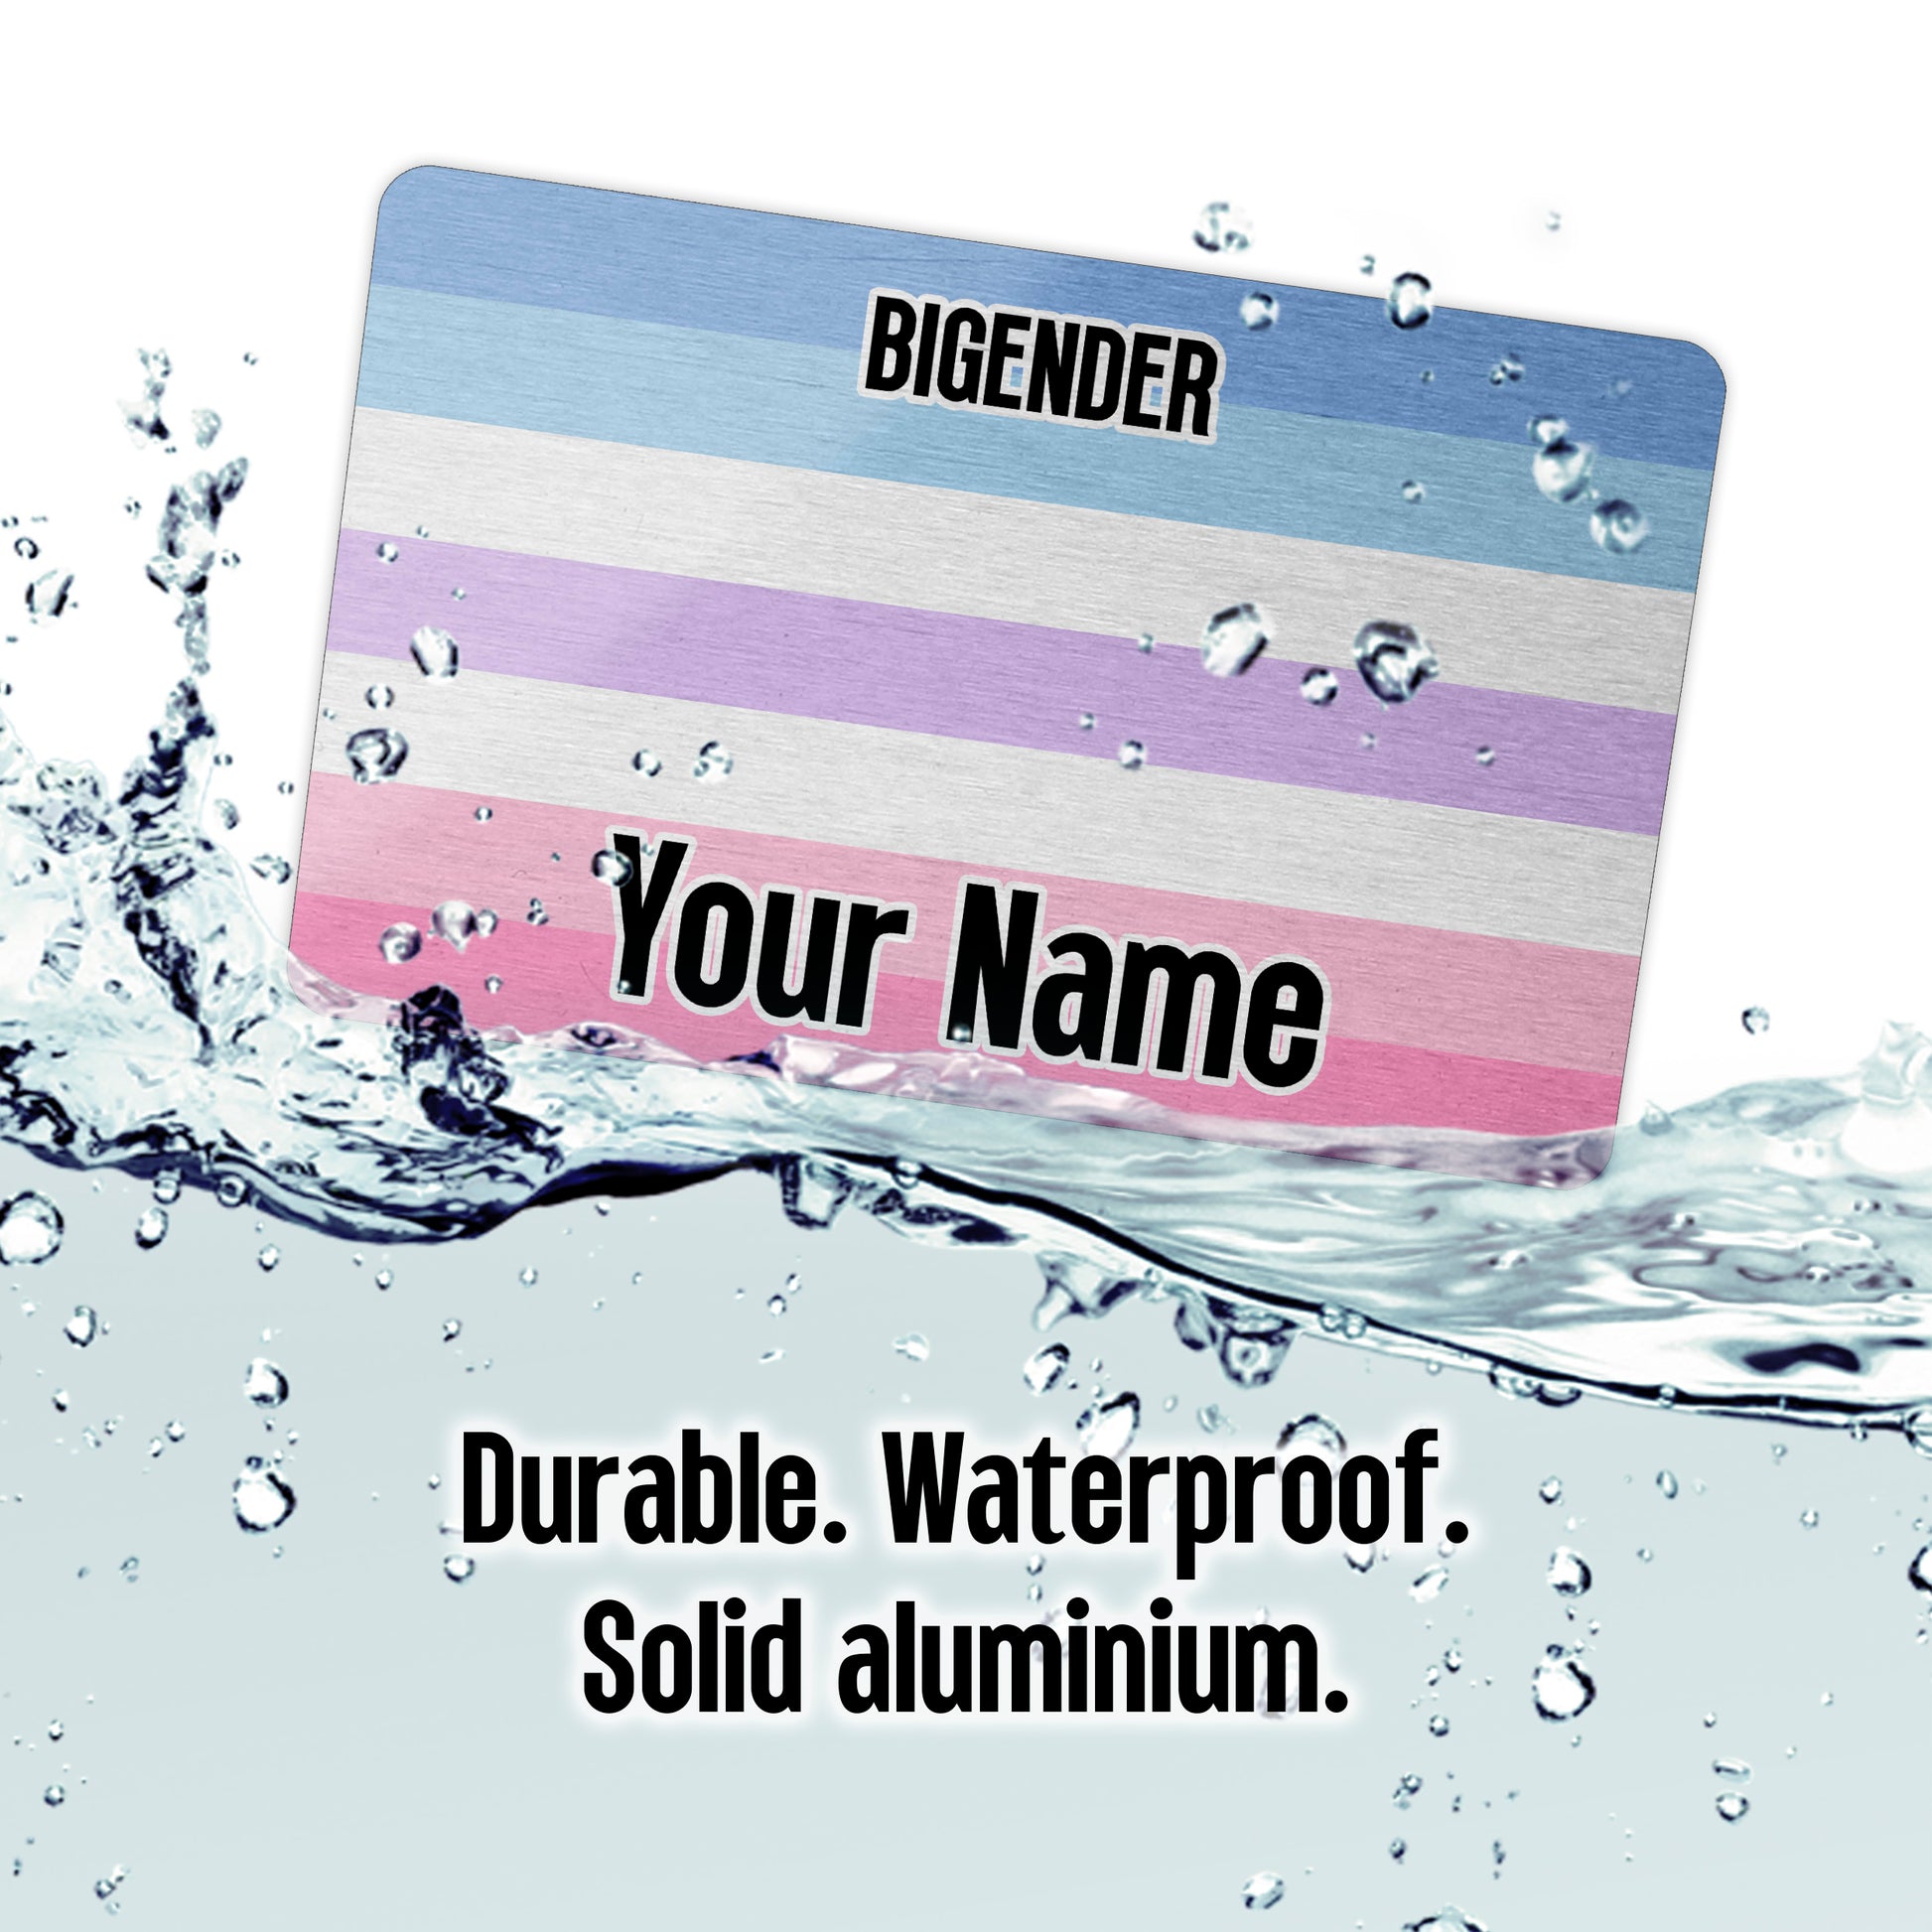 Aluminium wallet card personalised with your name and the bigender pride flag